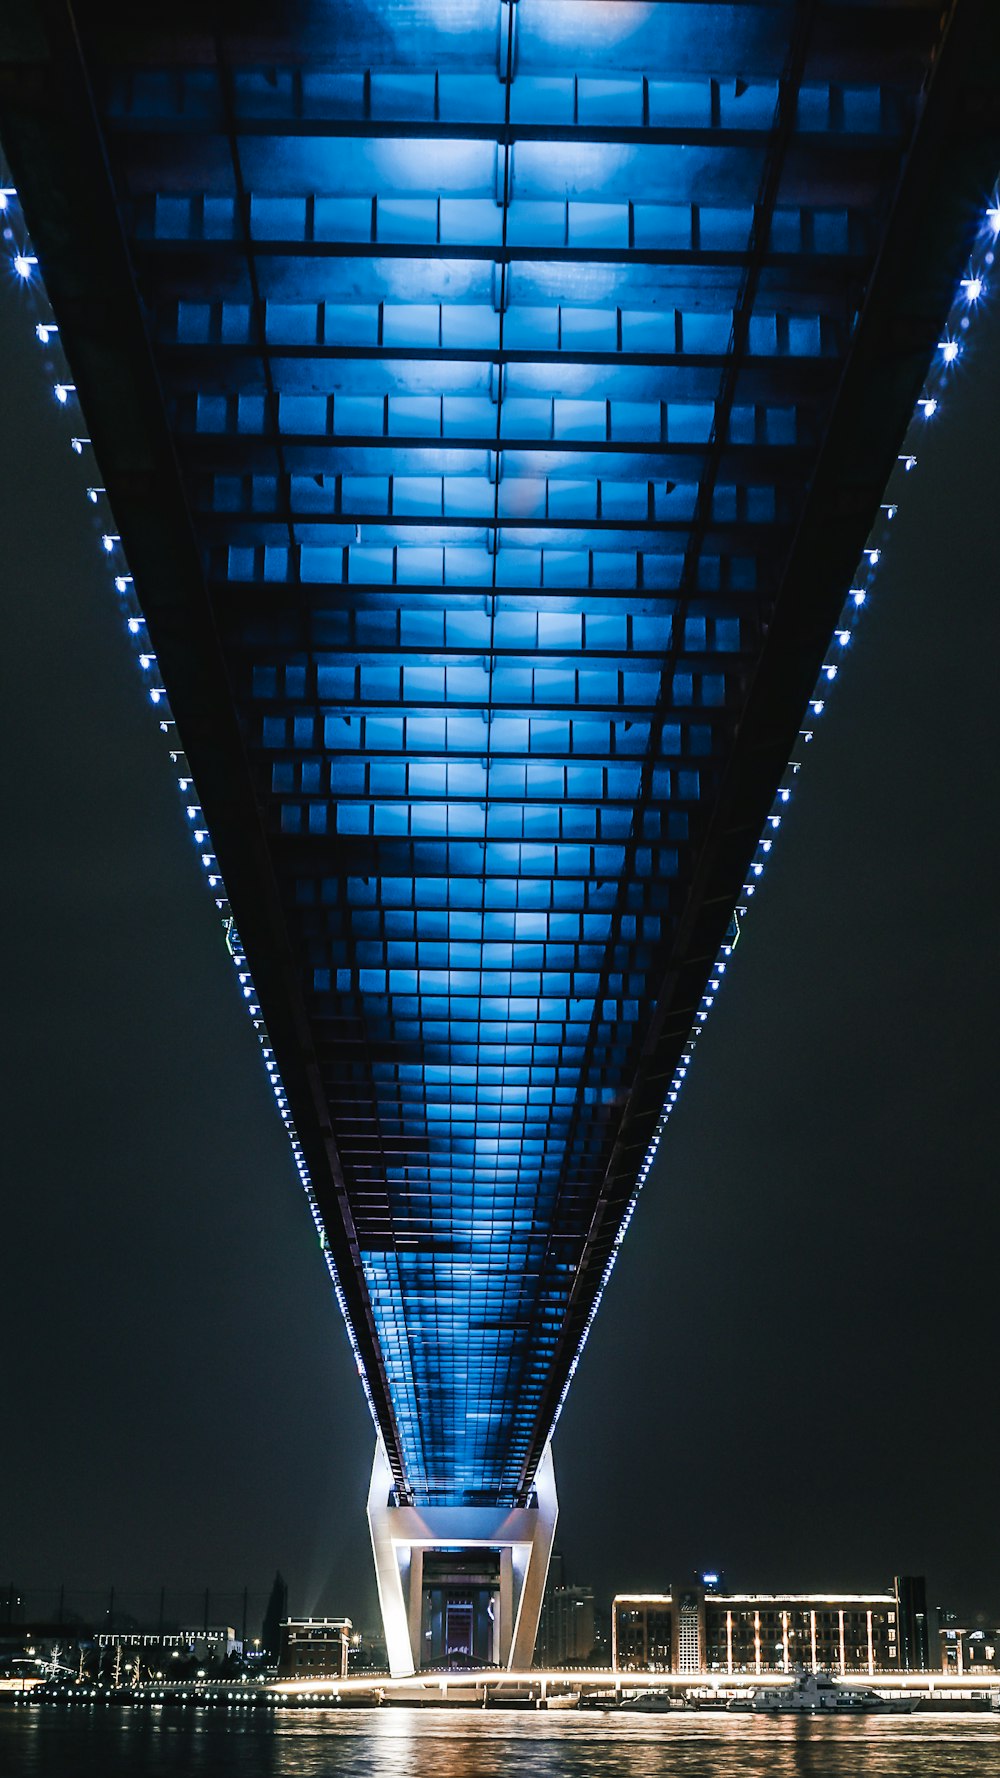 a view of the underside of a bridge at night